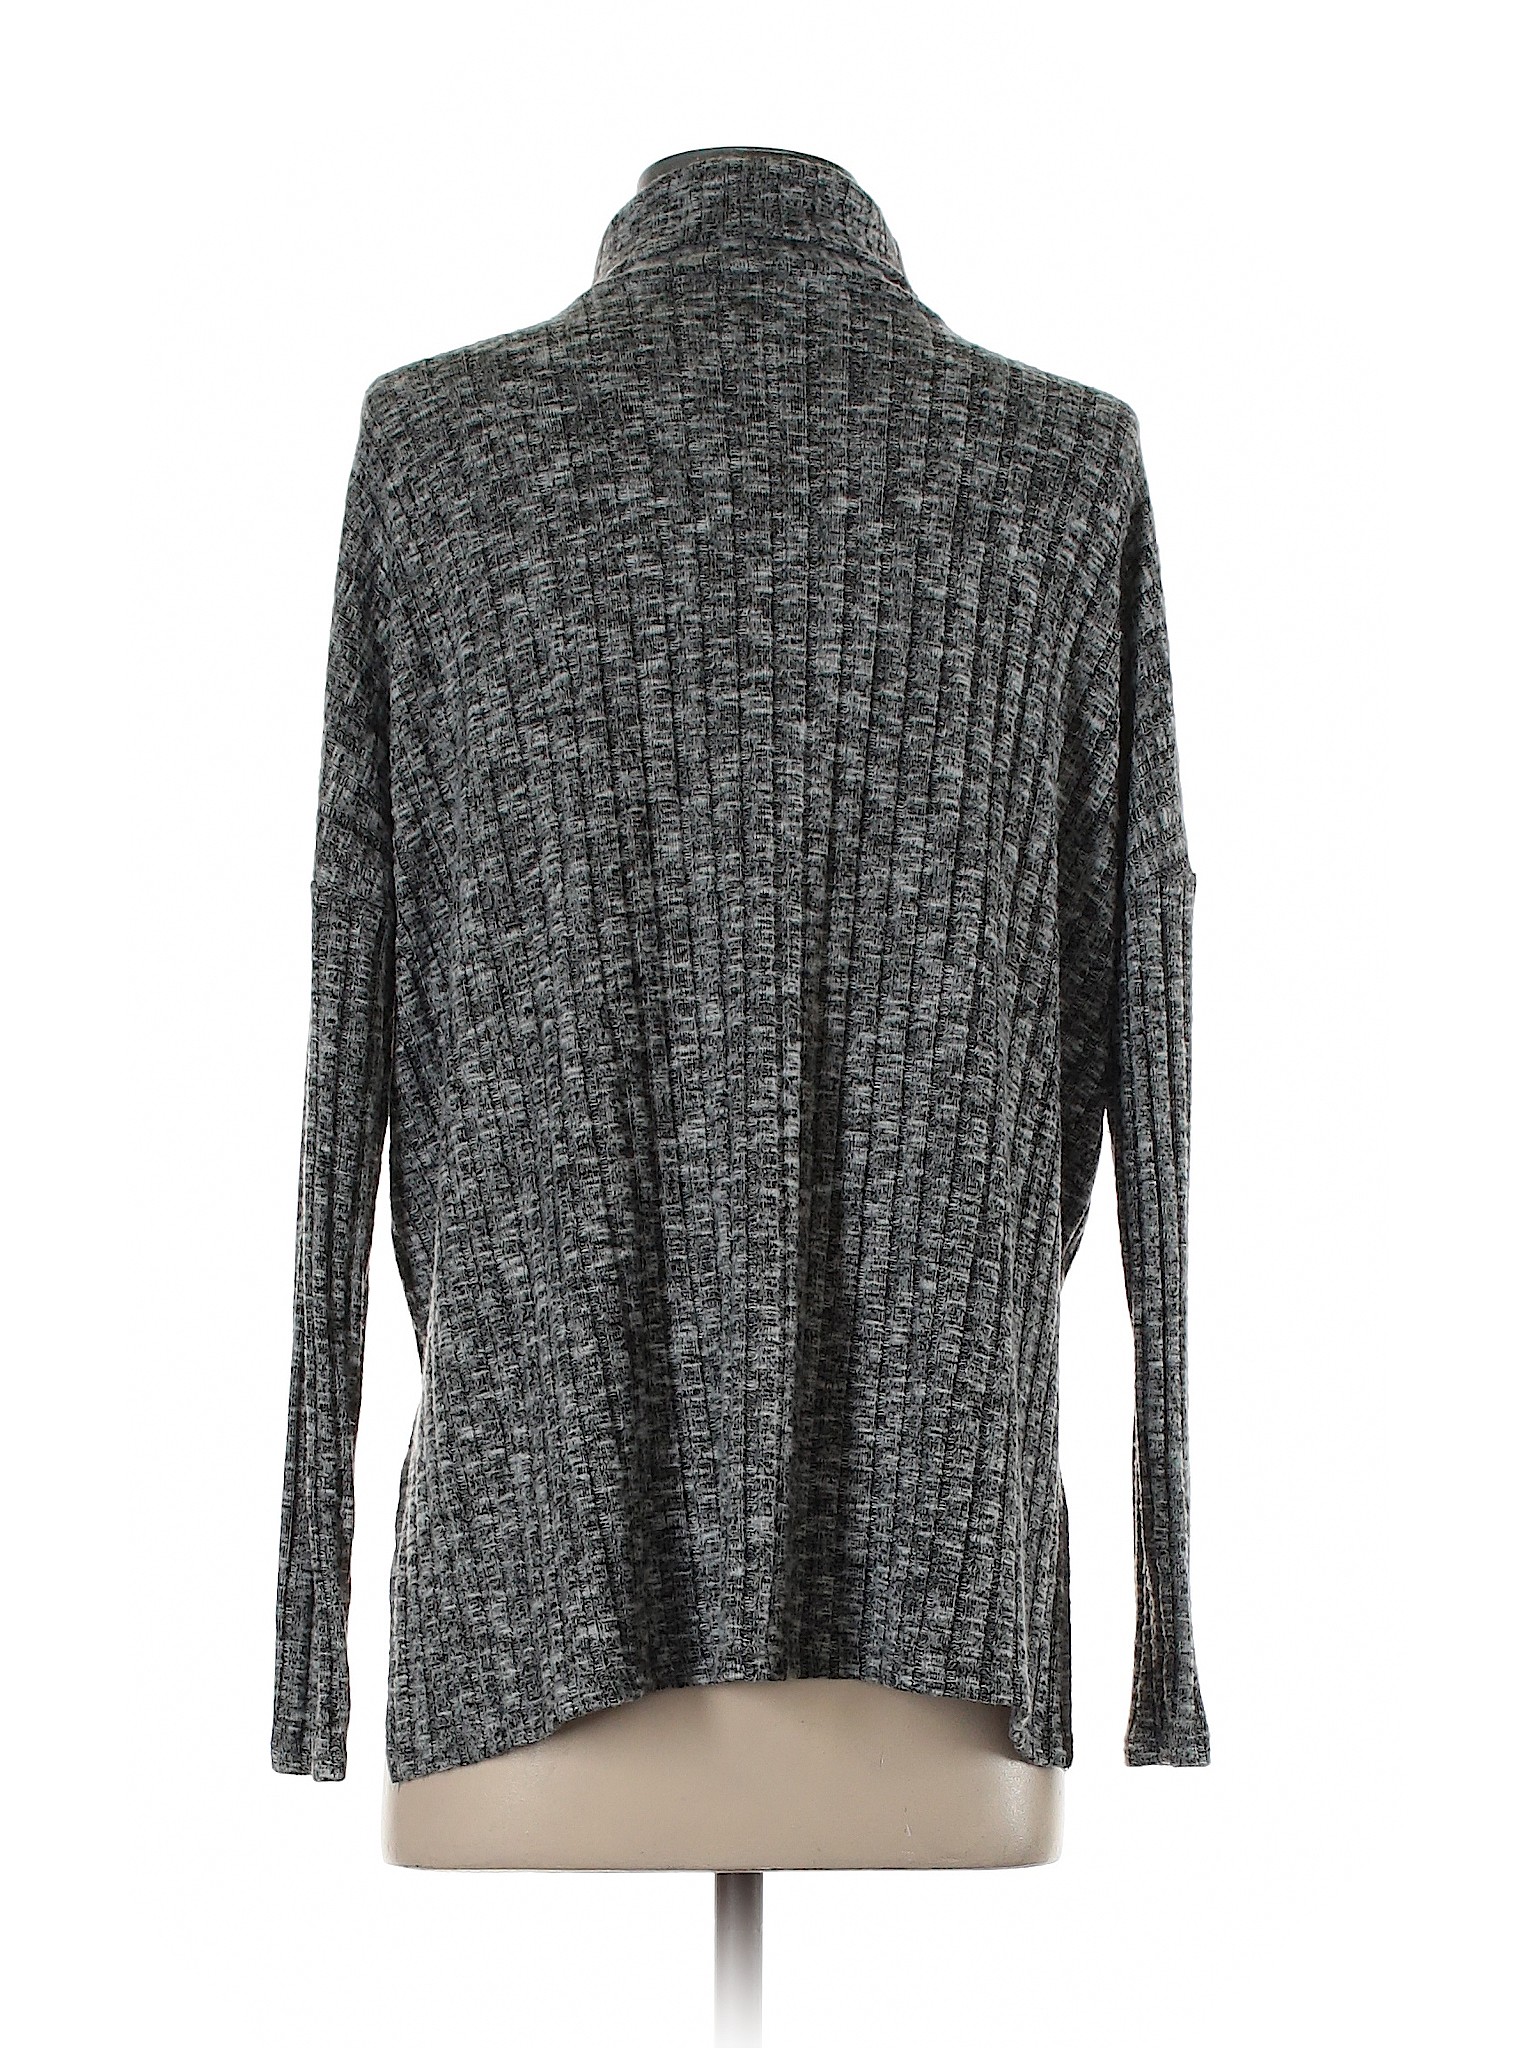 American Eagle Outfitters Women Gray Pullover Sweater XS | eBay